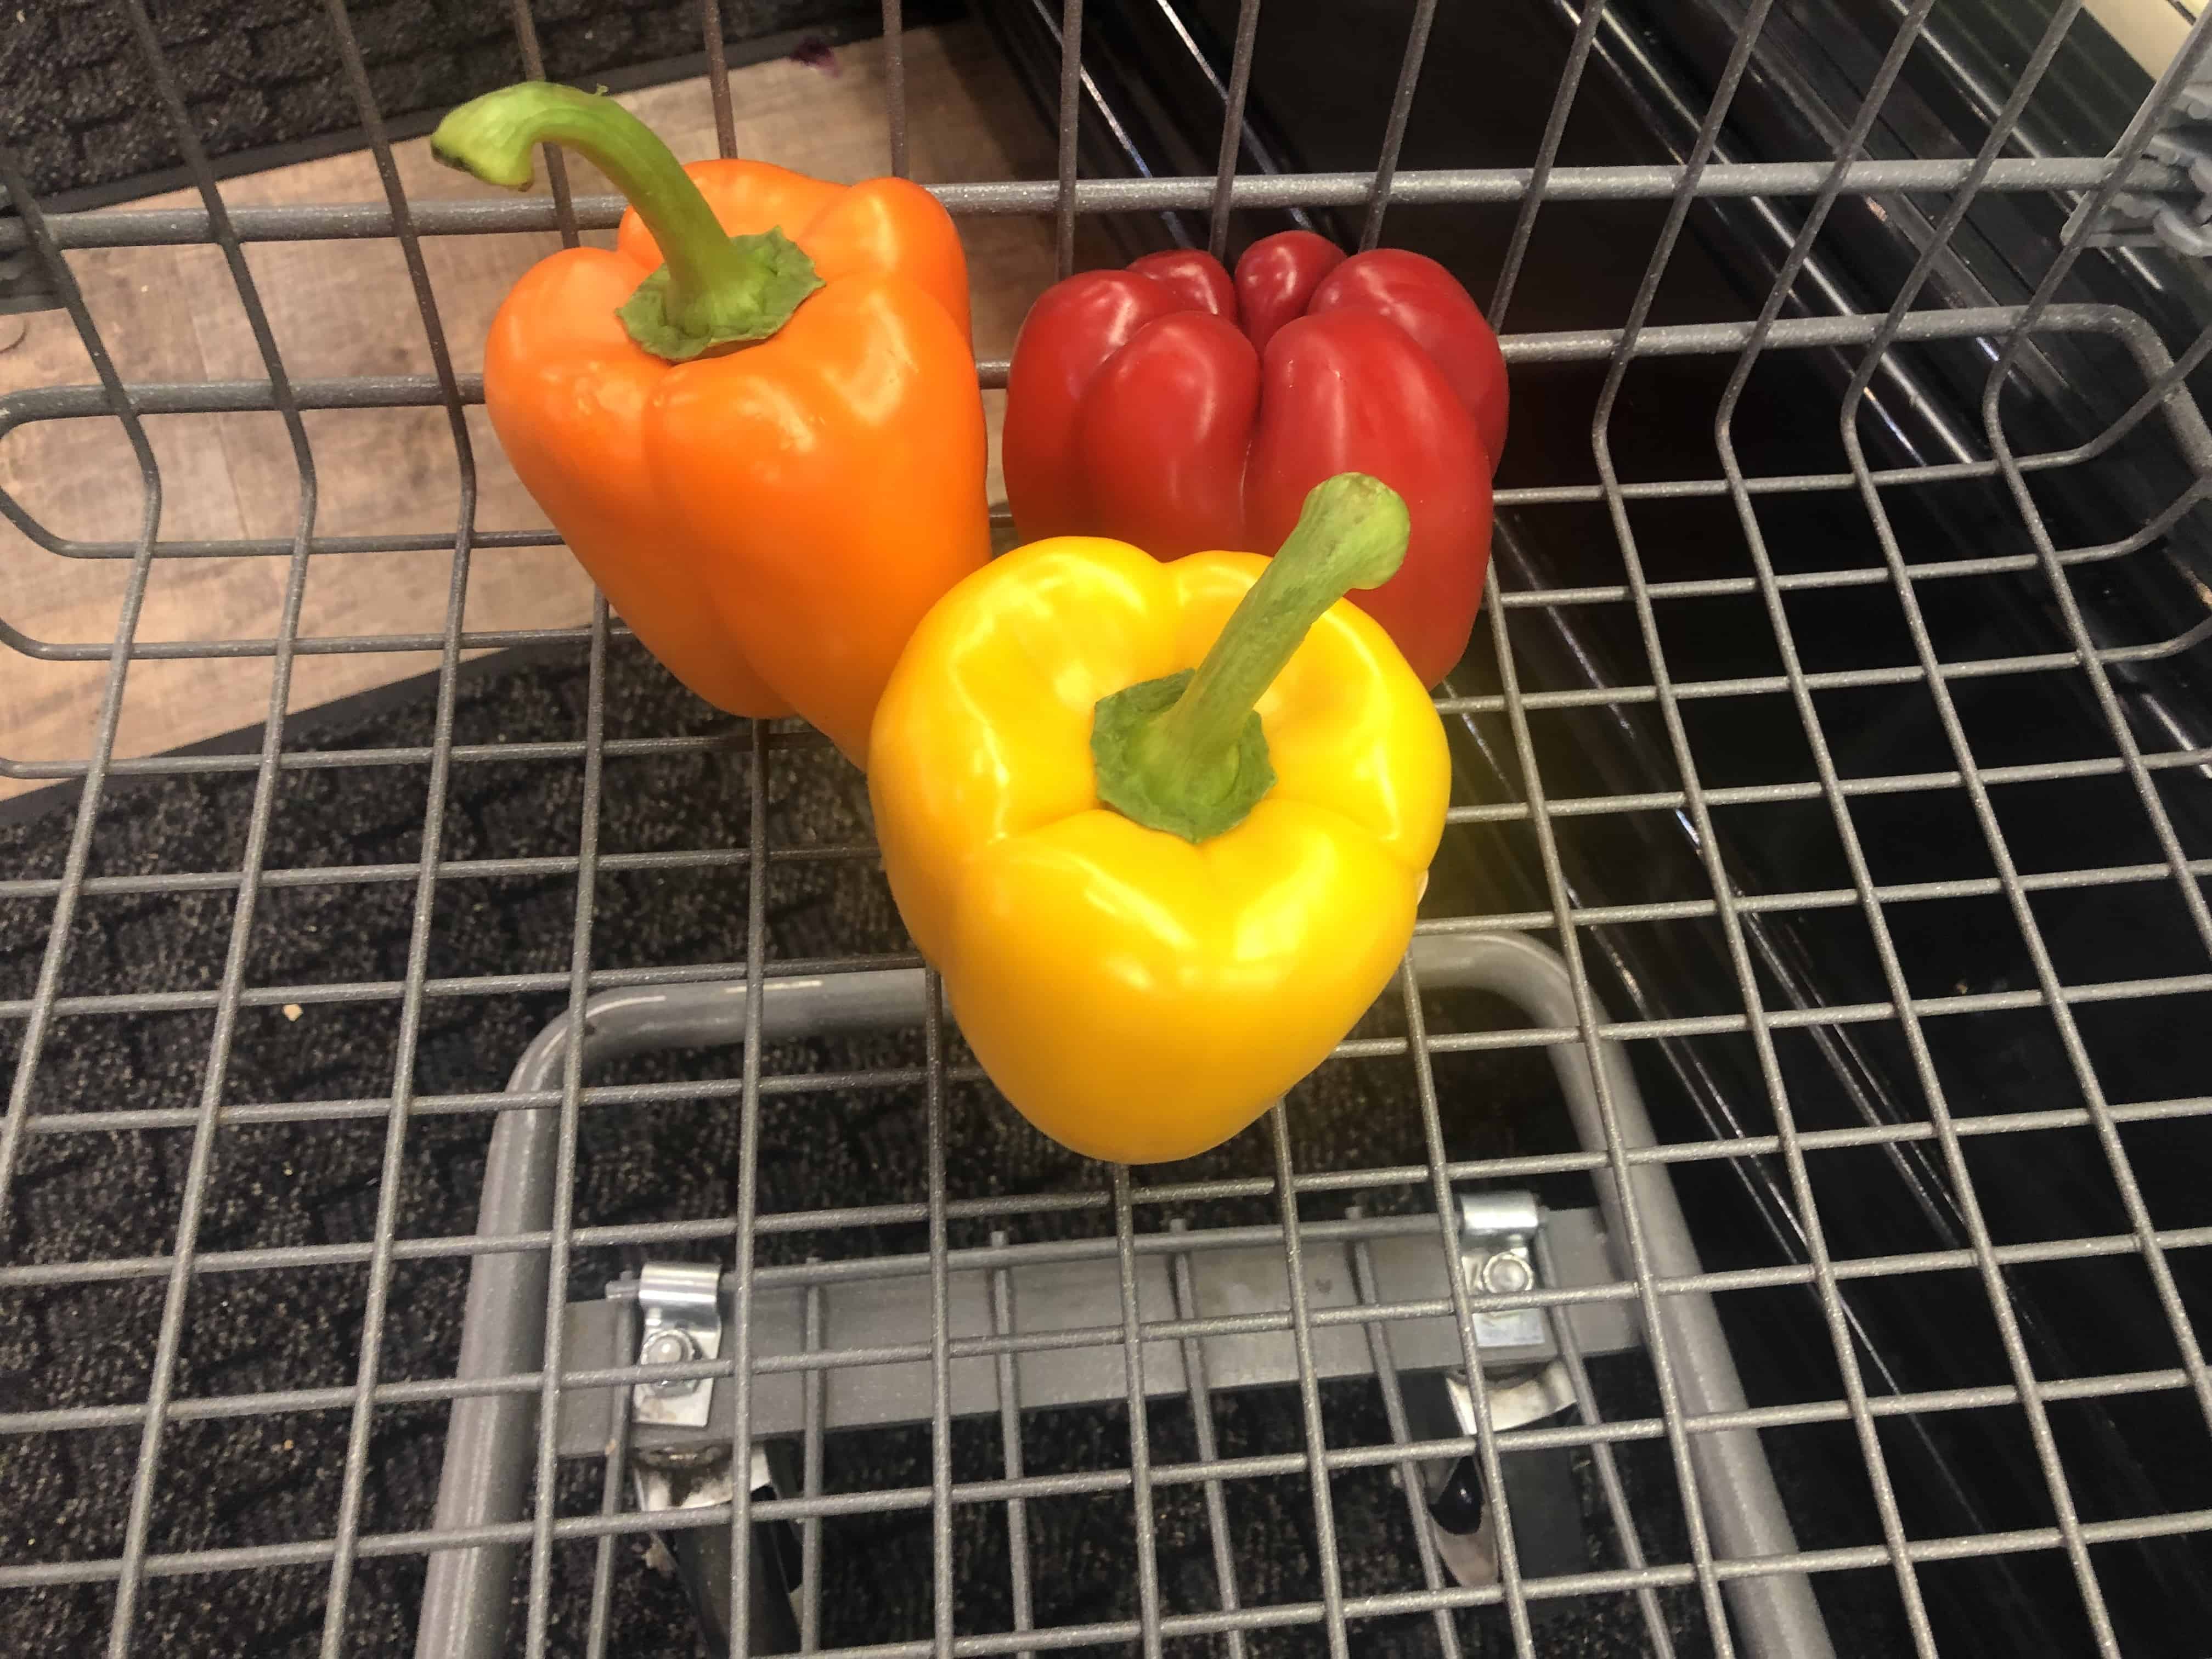 Giant: Hothouse Peppers & More ONLY $1.00 Each Starting 7/19!